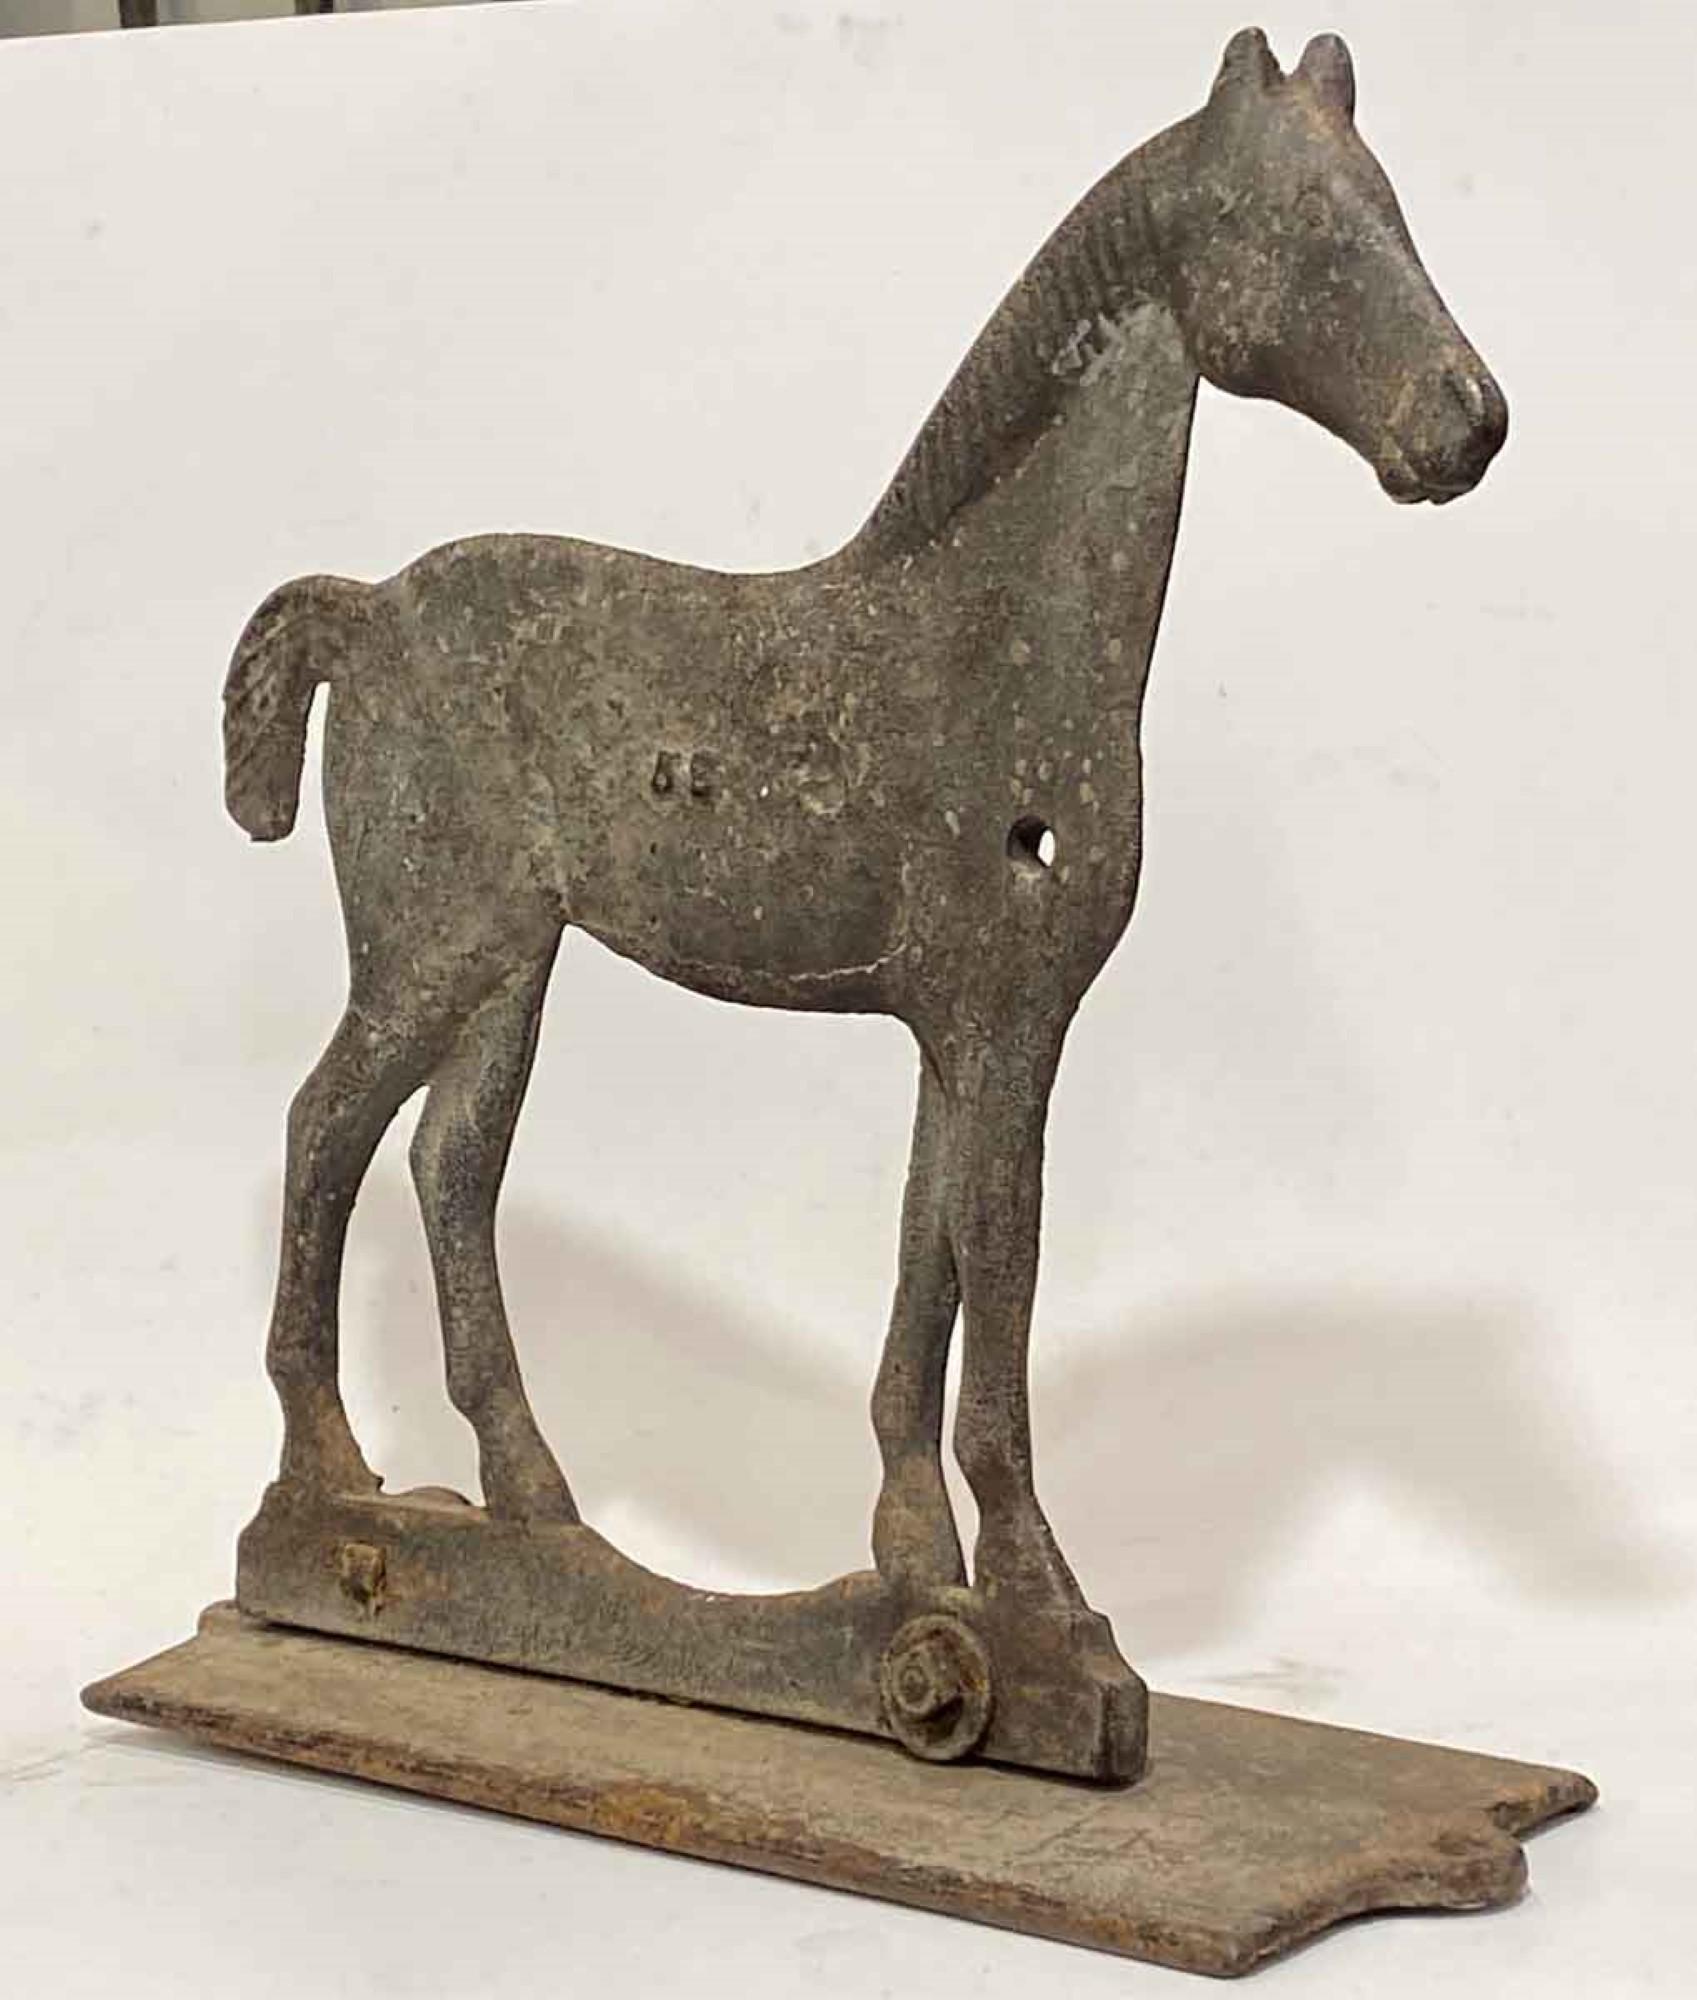 1920s antique cast iron horse windmill weight from the Midwest. Still mounted on the original cast iron weight box cover. Made by Dempster Vaneless Windmills. This can be seen at our 333 West 52nd St location in the Theater District West of